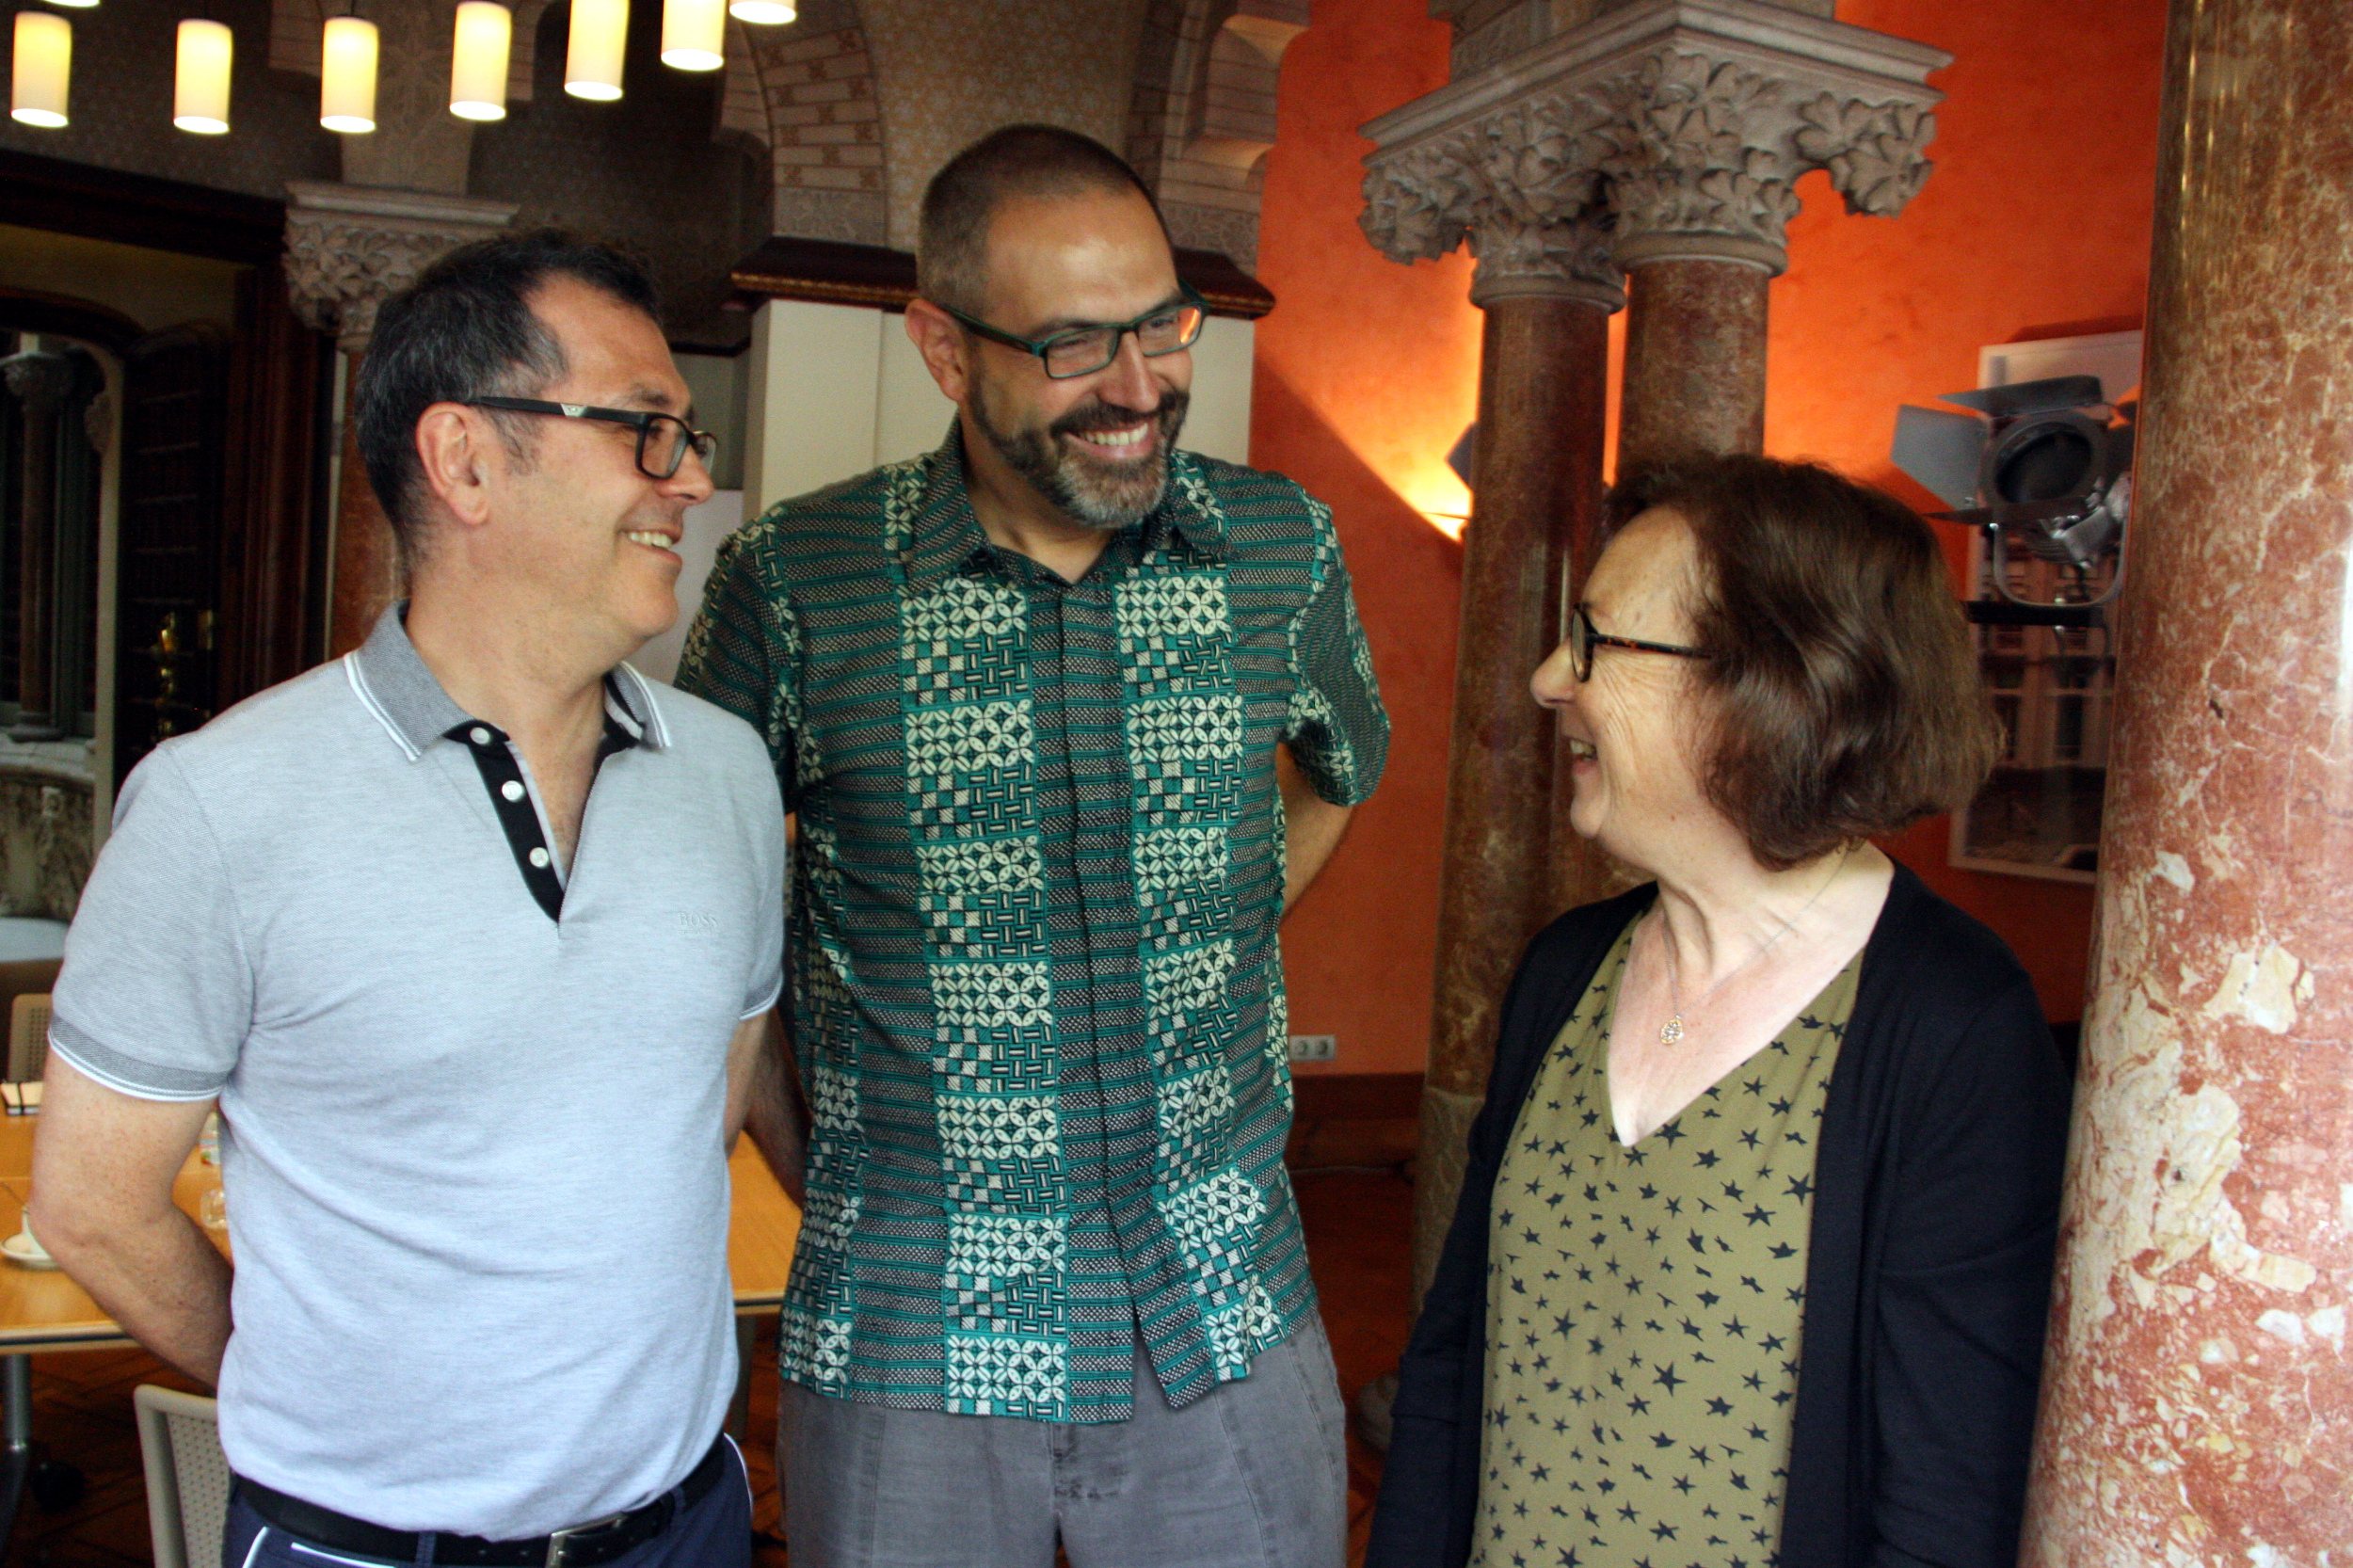 Institut Ramon Llull's Director, Manuel Forcano, joined by Josep-Anton Fernández, responsbile for the IRL's Universities Department and Carme Oriol, from Universitat Rovira i Virgili (by ACN)